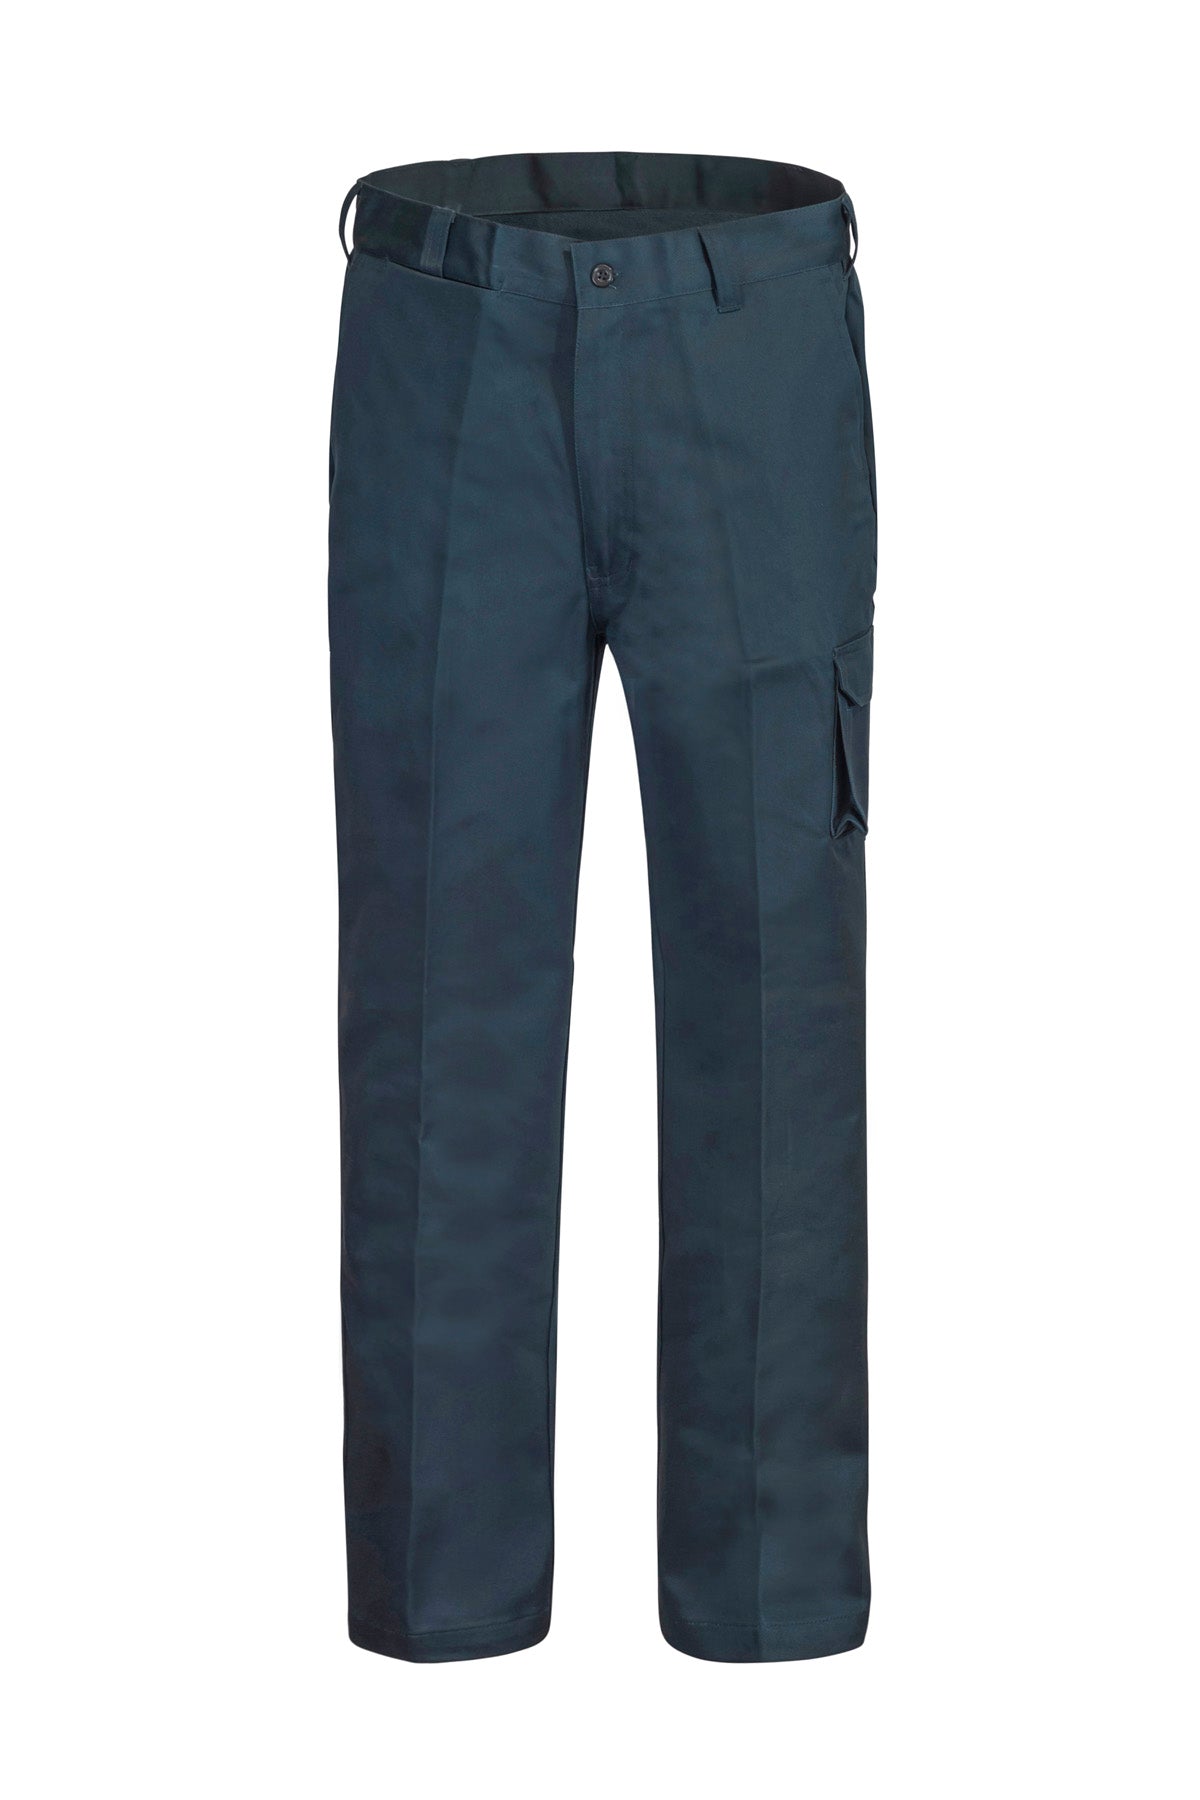 Cargo Cotton Drill Trouser - made by Workcraft